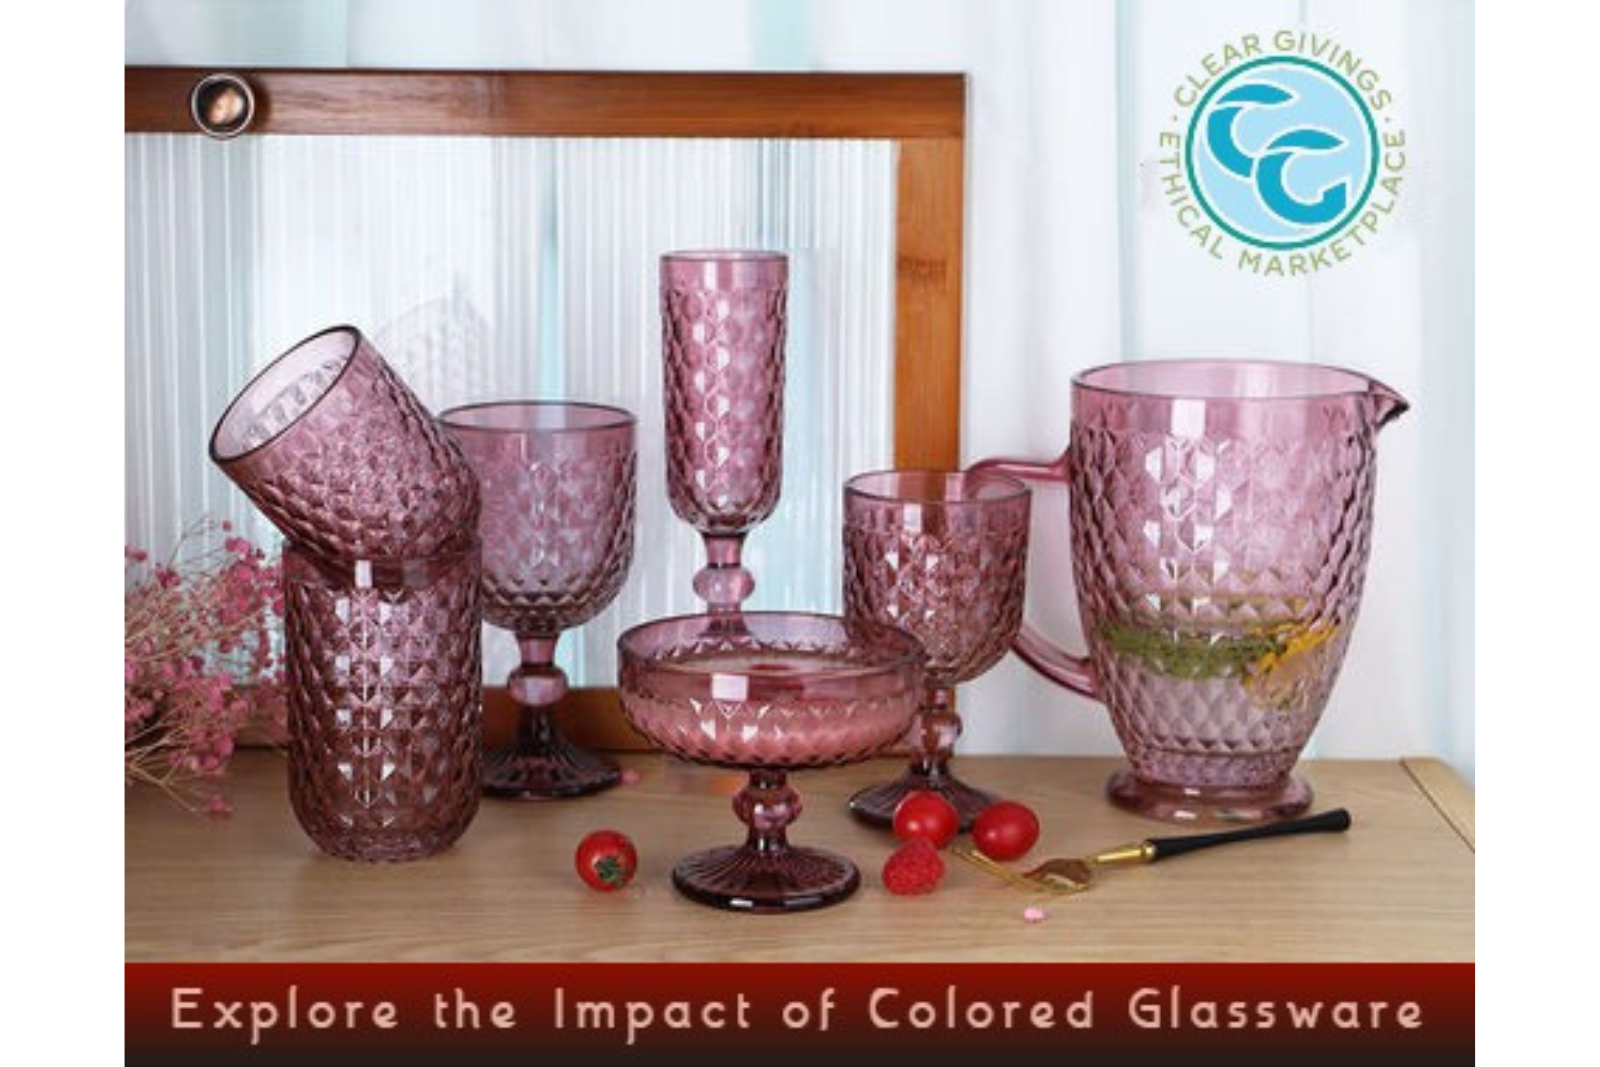 How Does Colored Glassware Affect the Dining Experience?